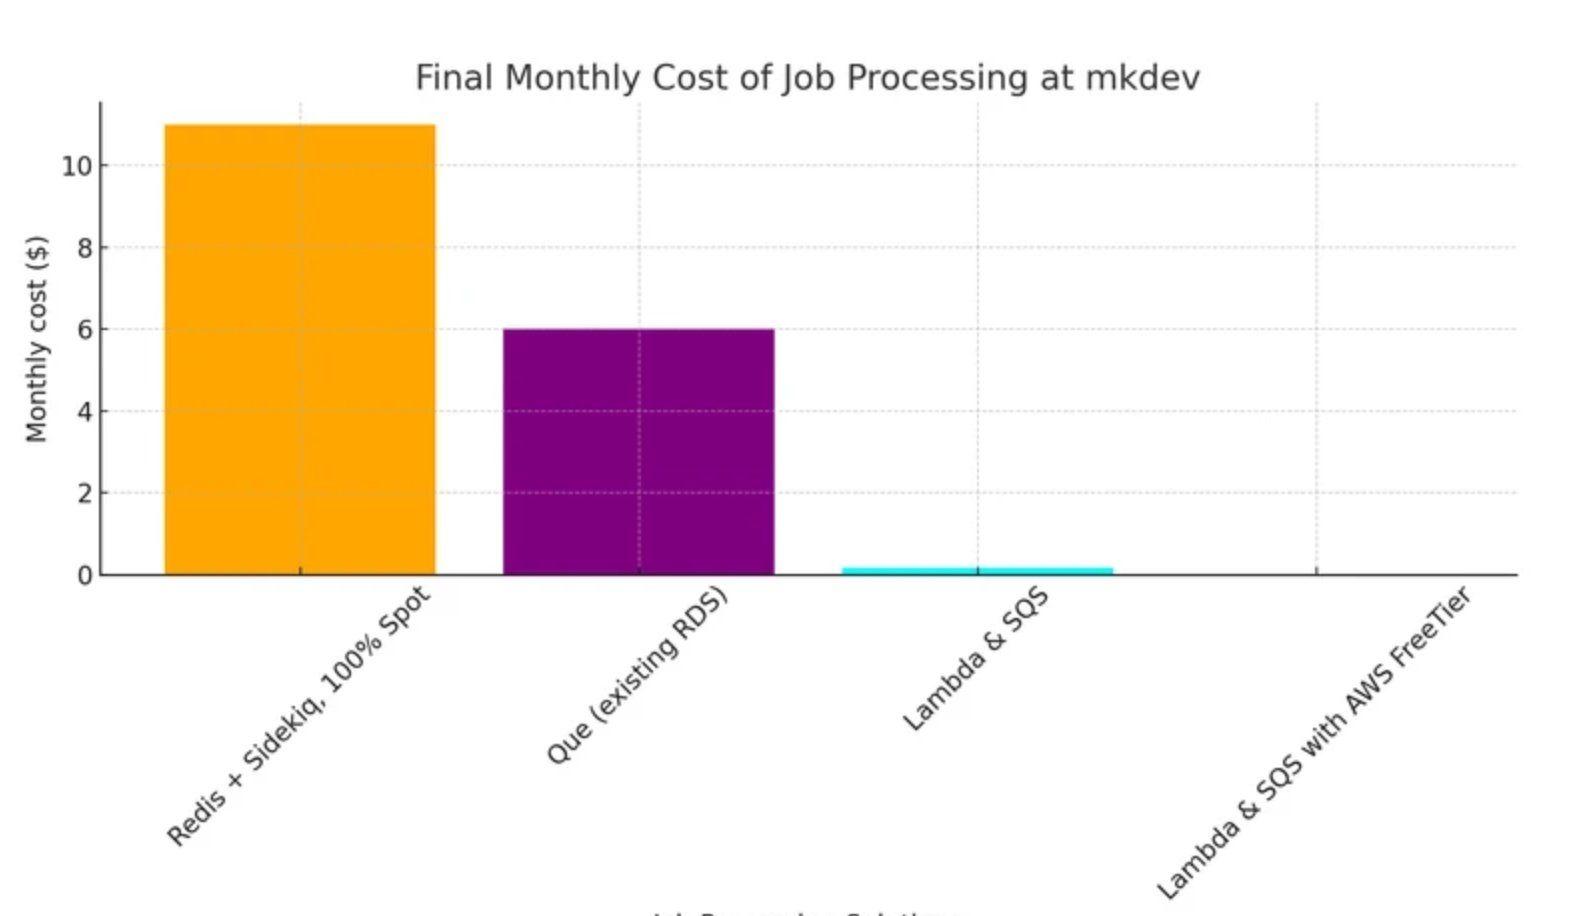 Graph showing monthly cost of job processing at mkdev, comparing Lambda with Fargate and Fargate Spo